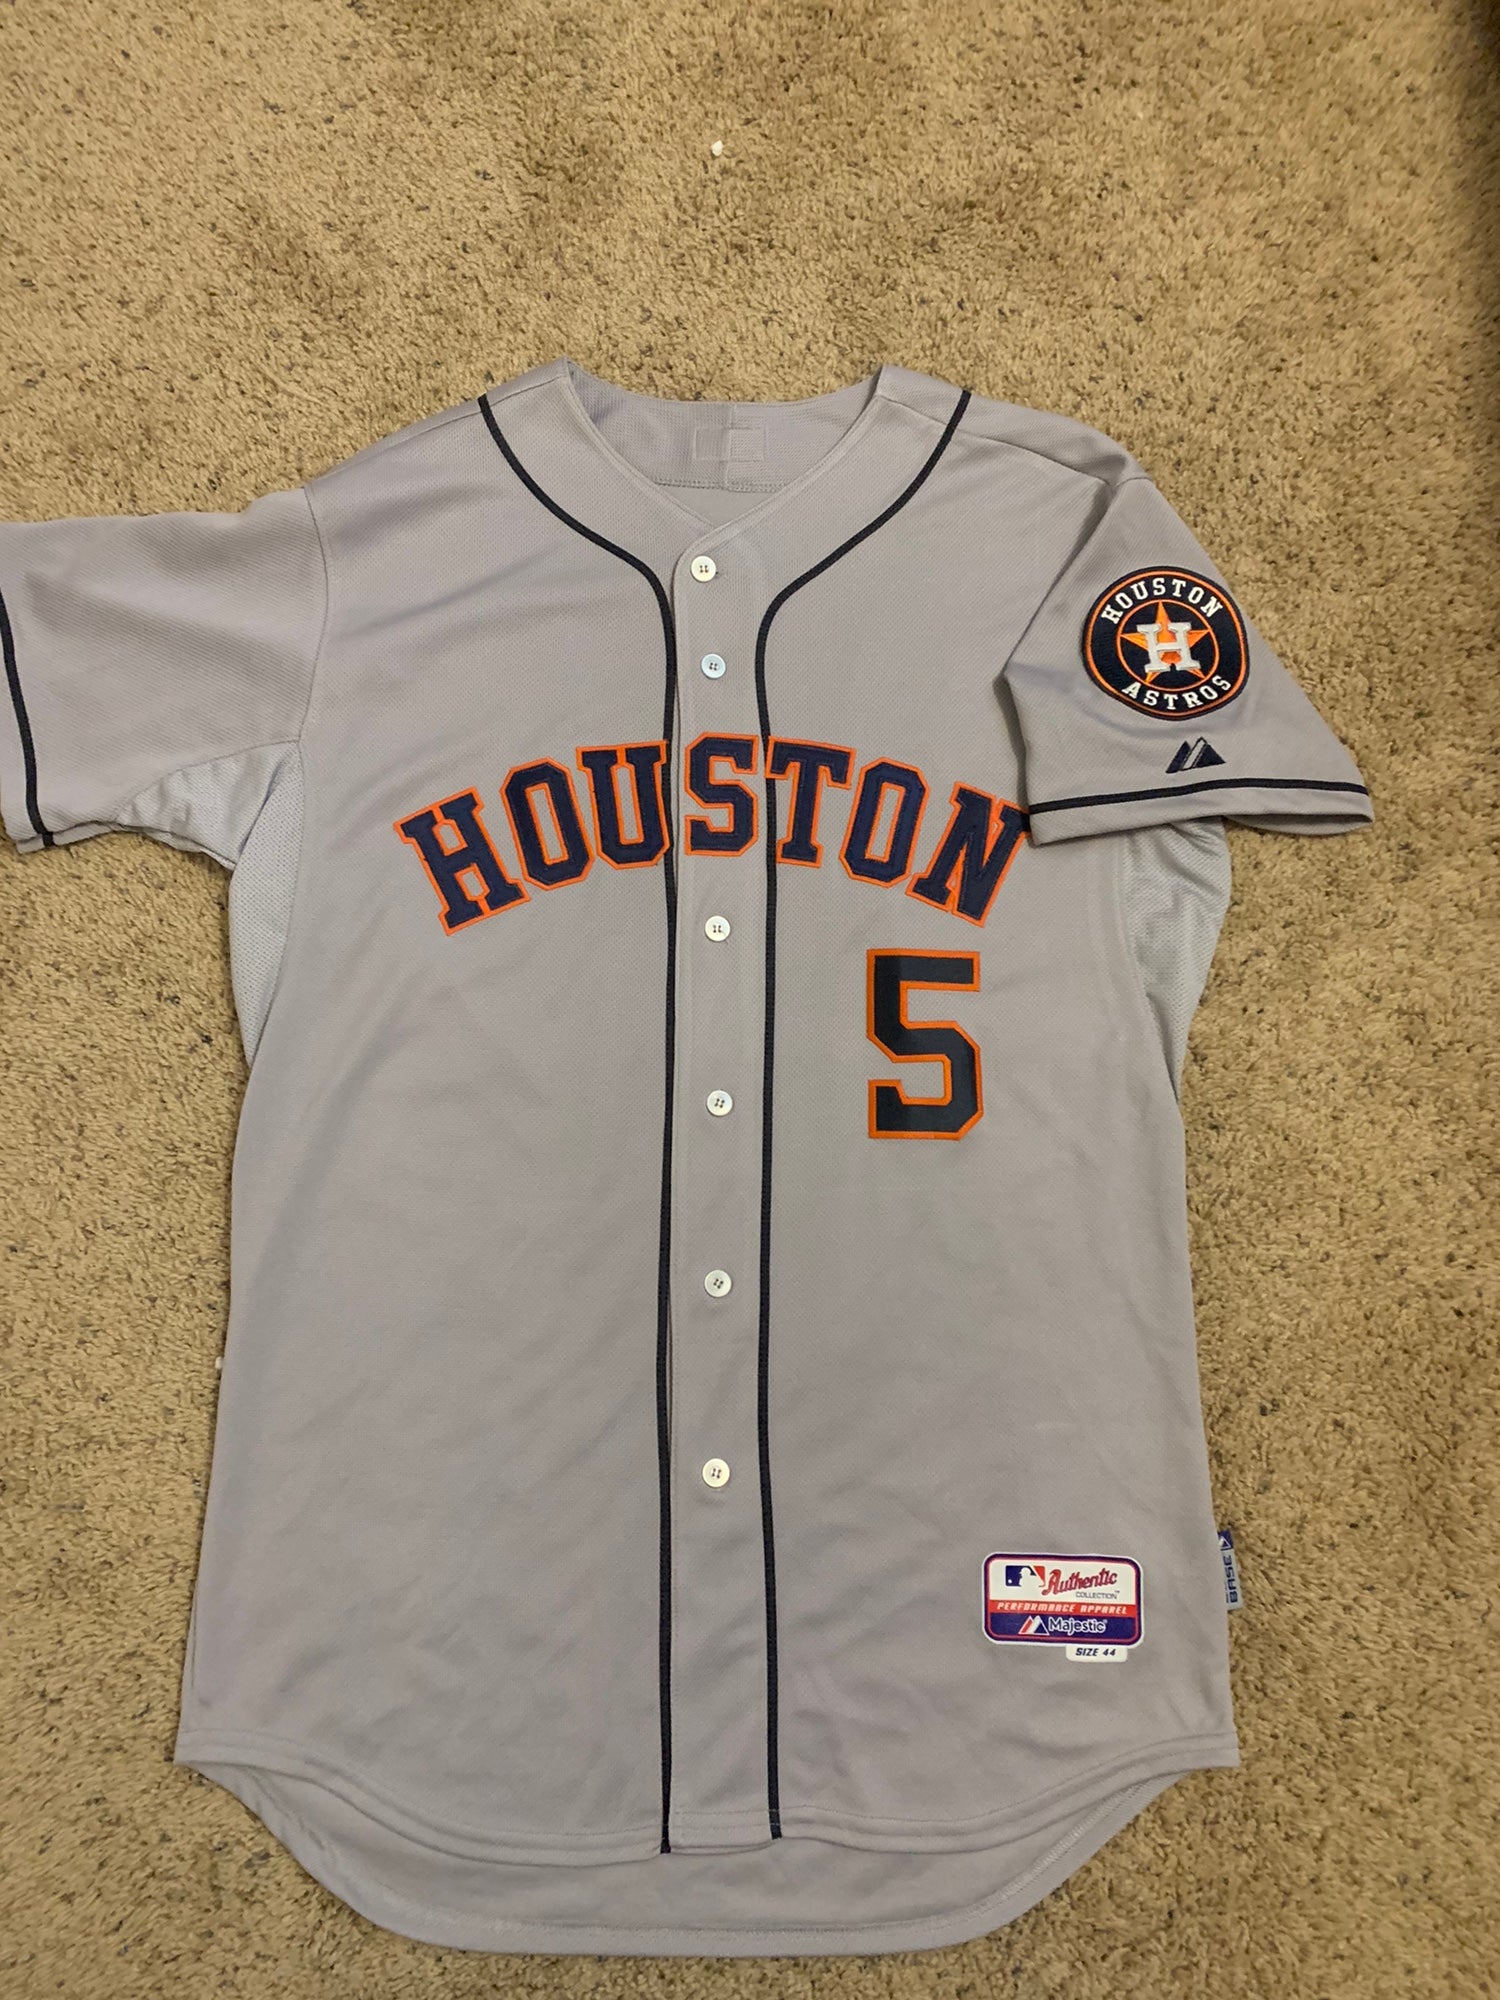 Official winning starts now st18 houston astros majestic authentic